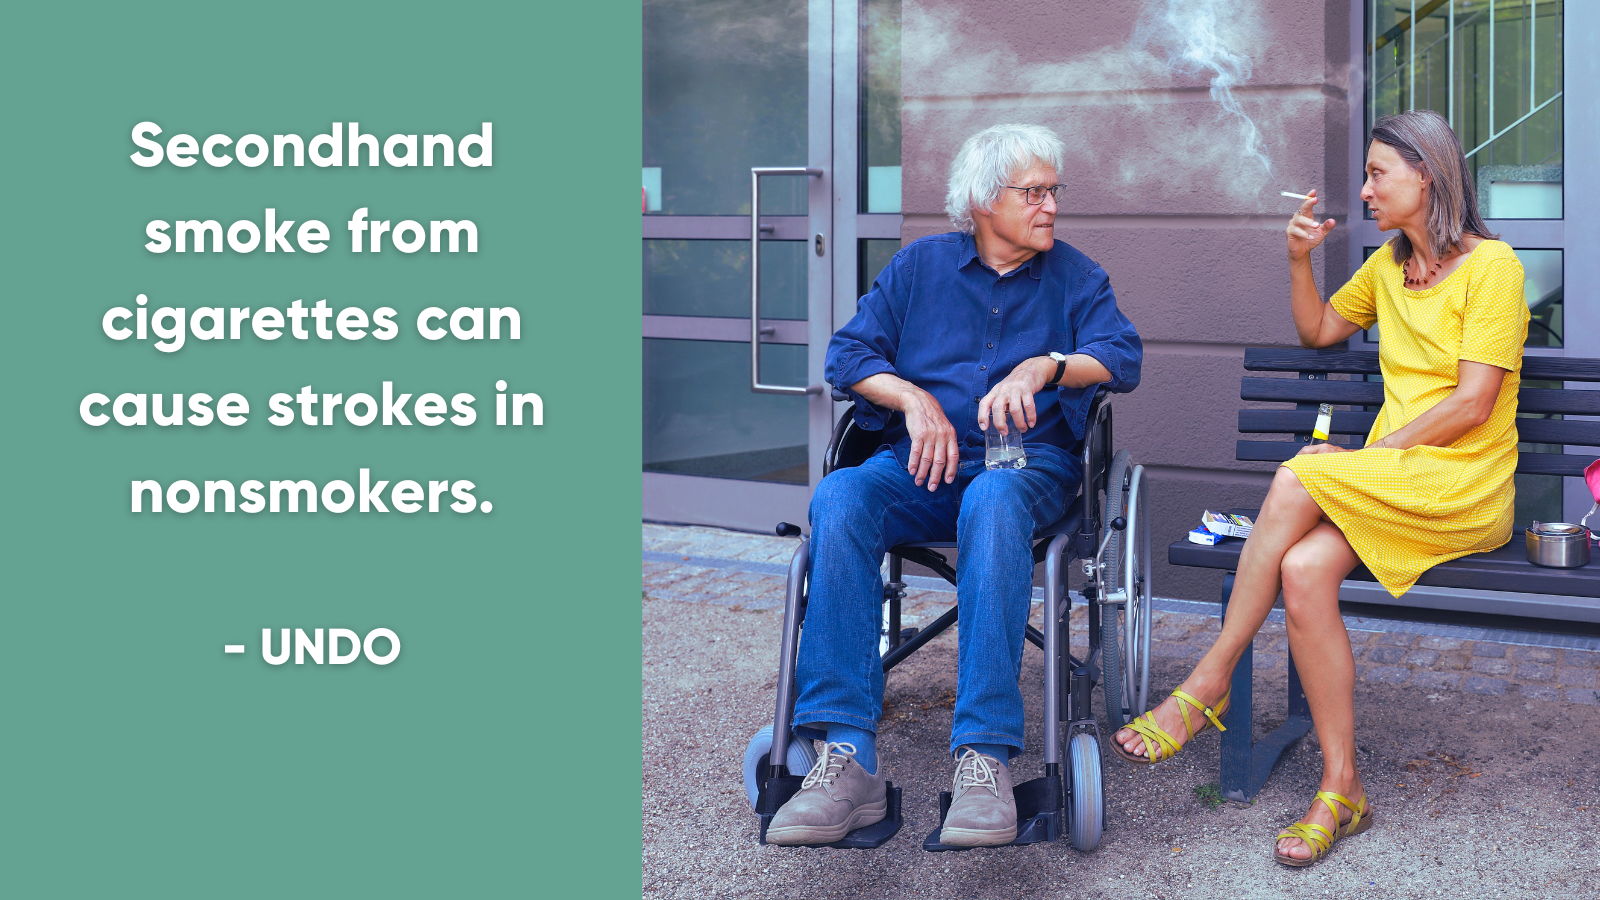 Secondhand smoke from cigarettes can cause strokes in nonsmokers.